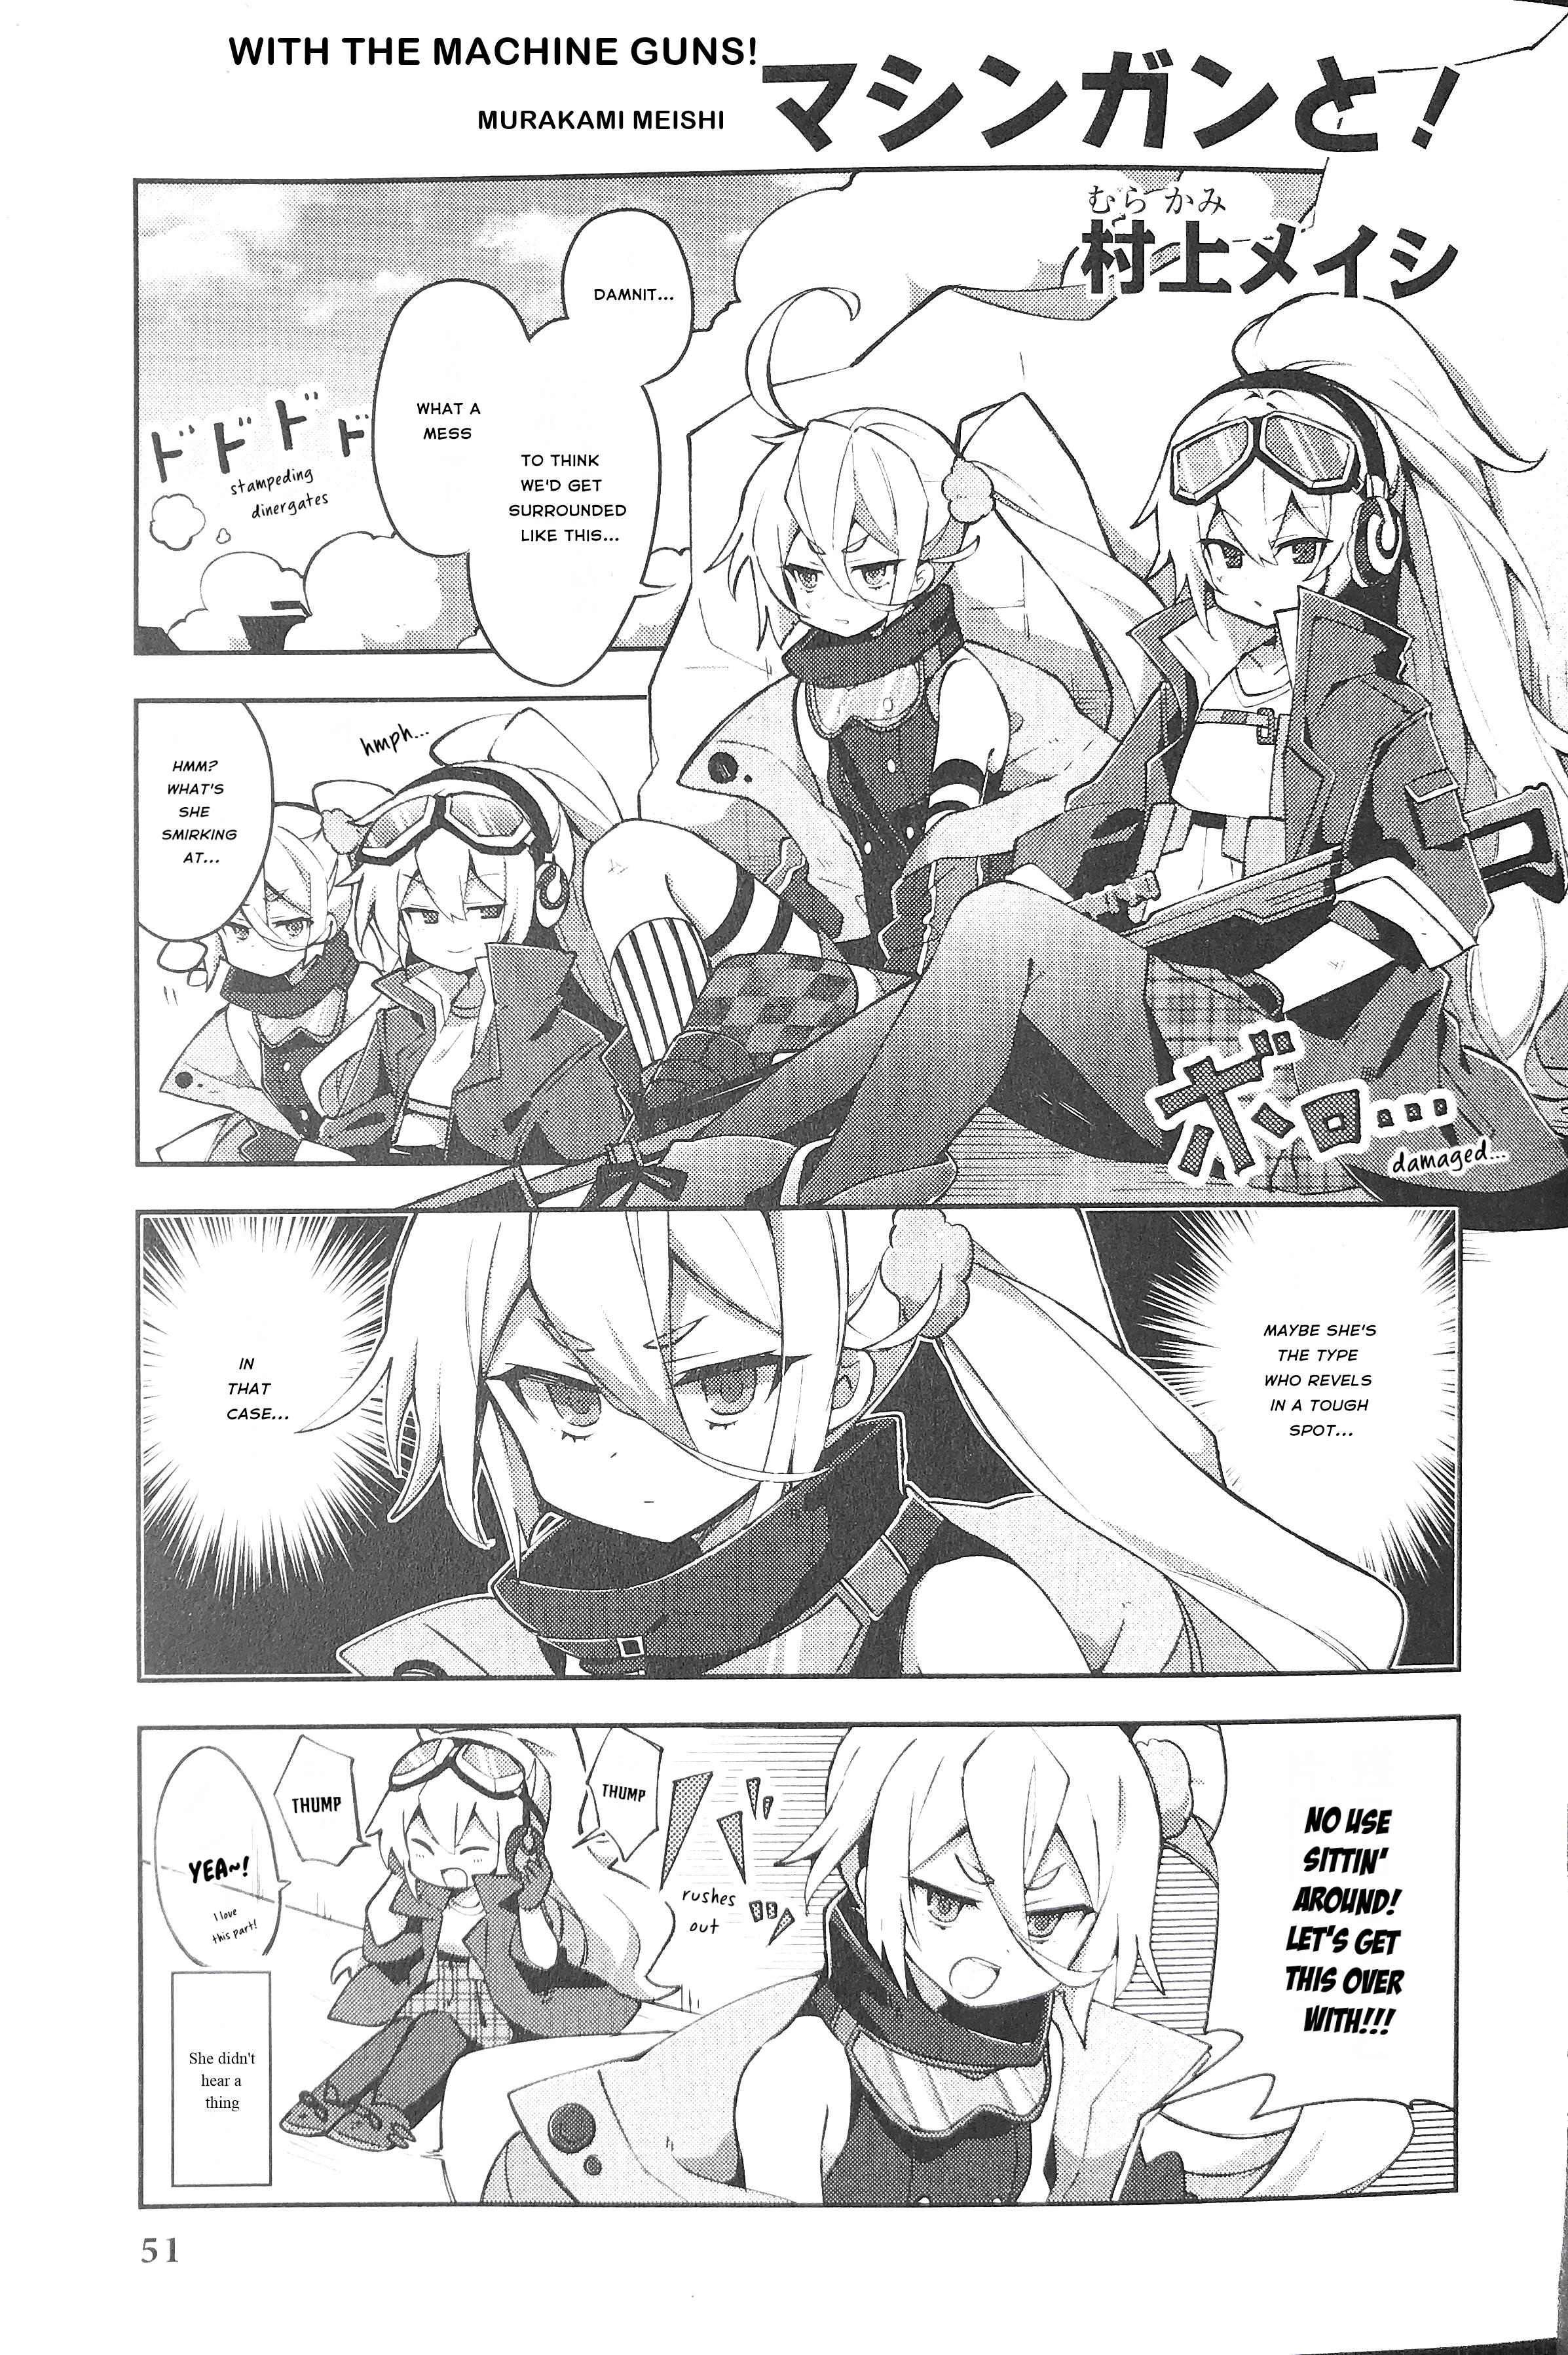 Dolls Frontline Comic Anthology - DNA Media 2019 - Chapter 28616 - With the Machine Guns - Image 1